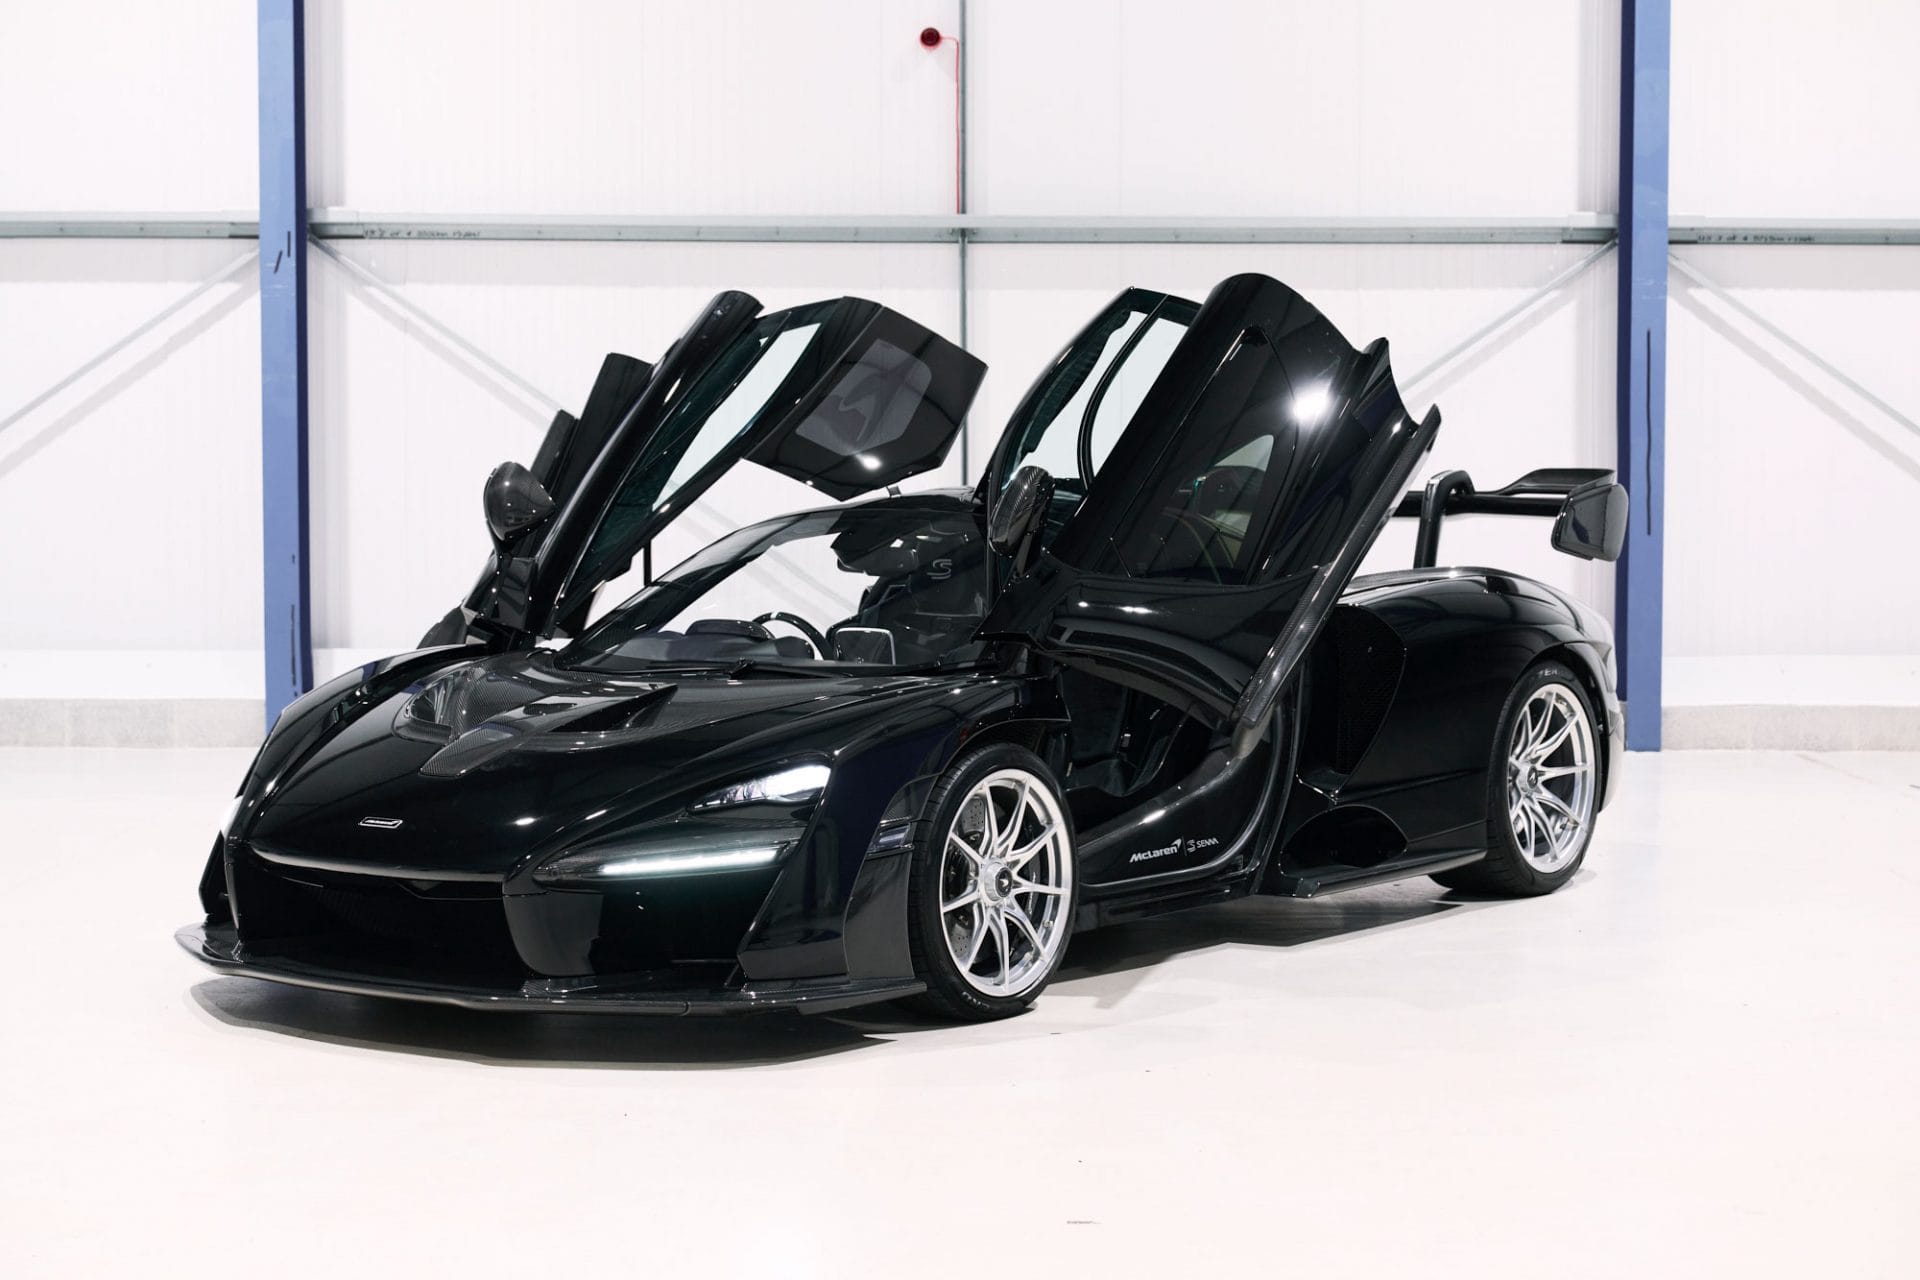 A black mclaren sports car with open butterfly doors parked inside a showroom.